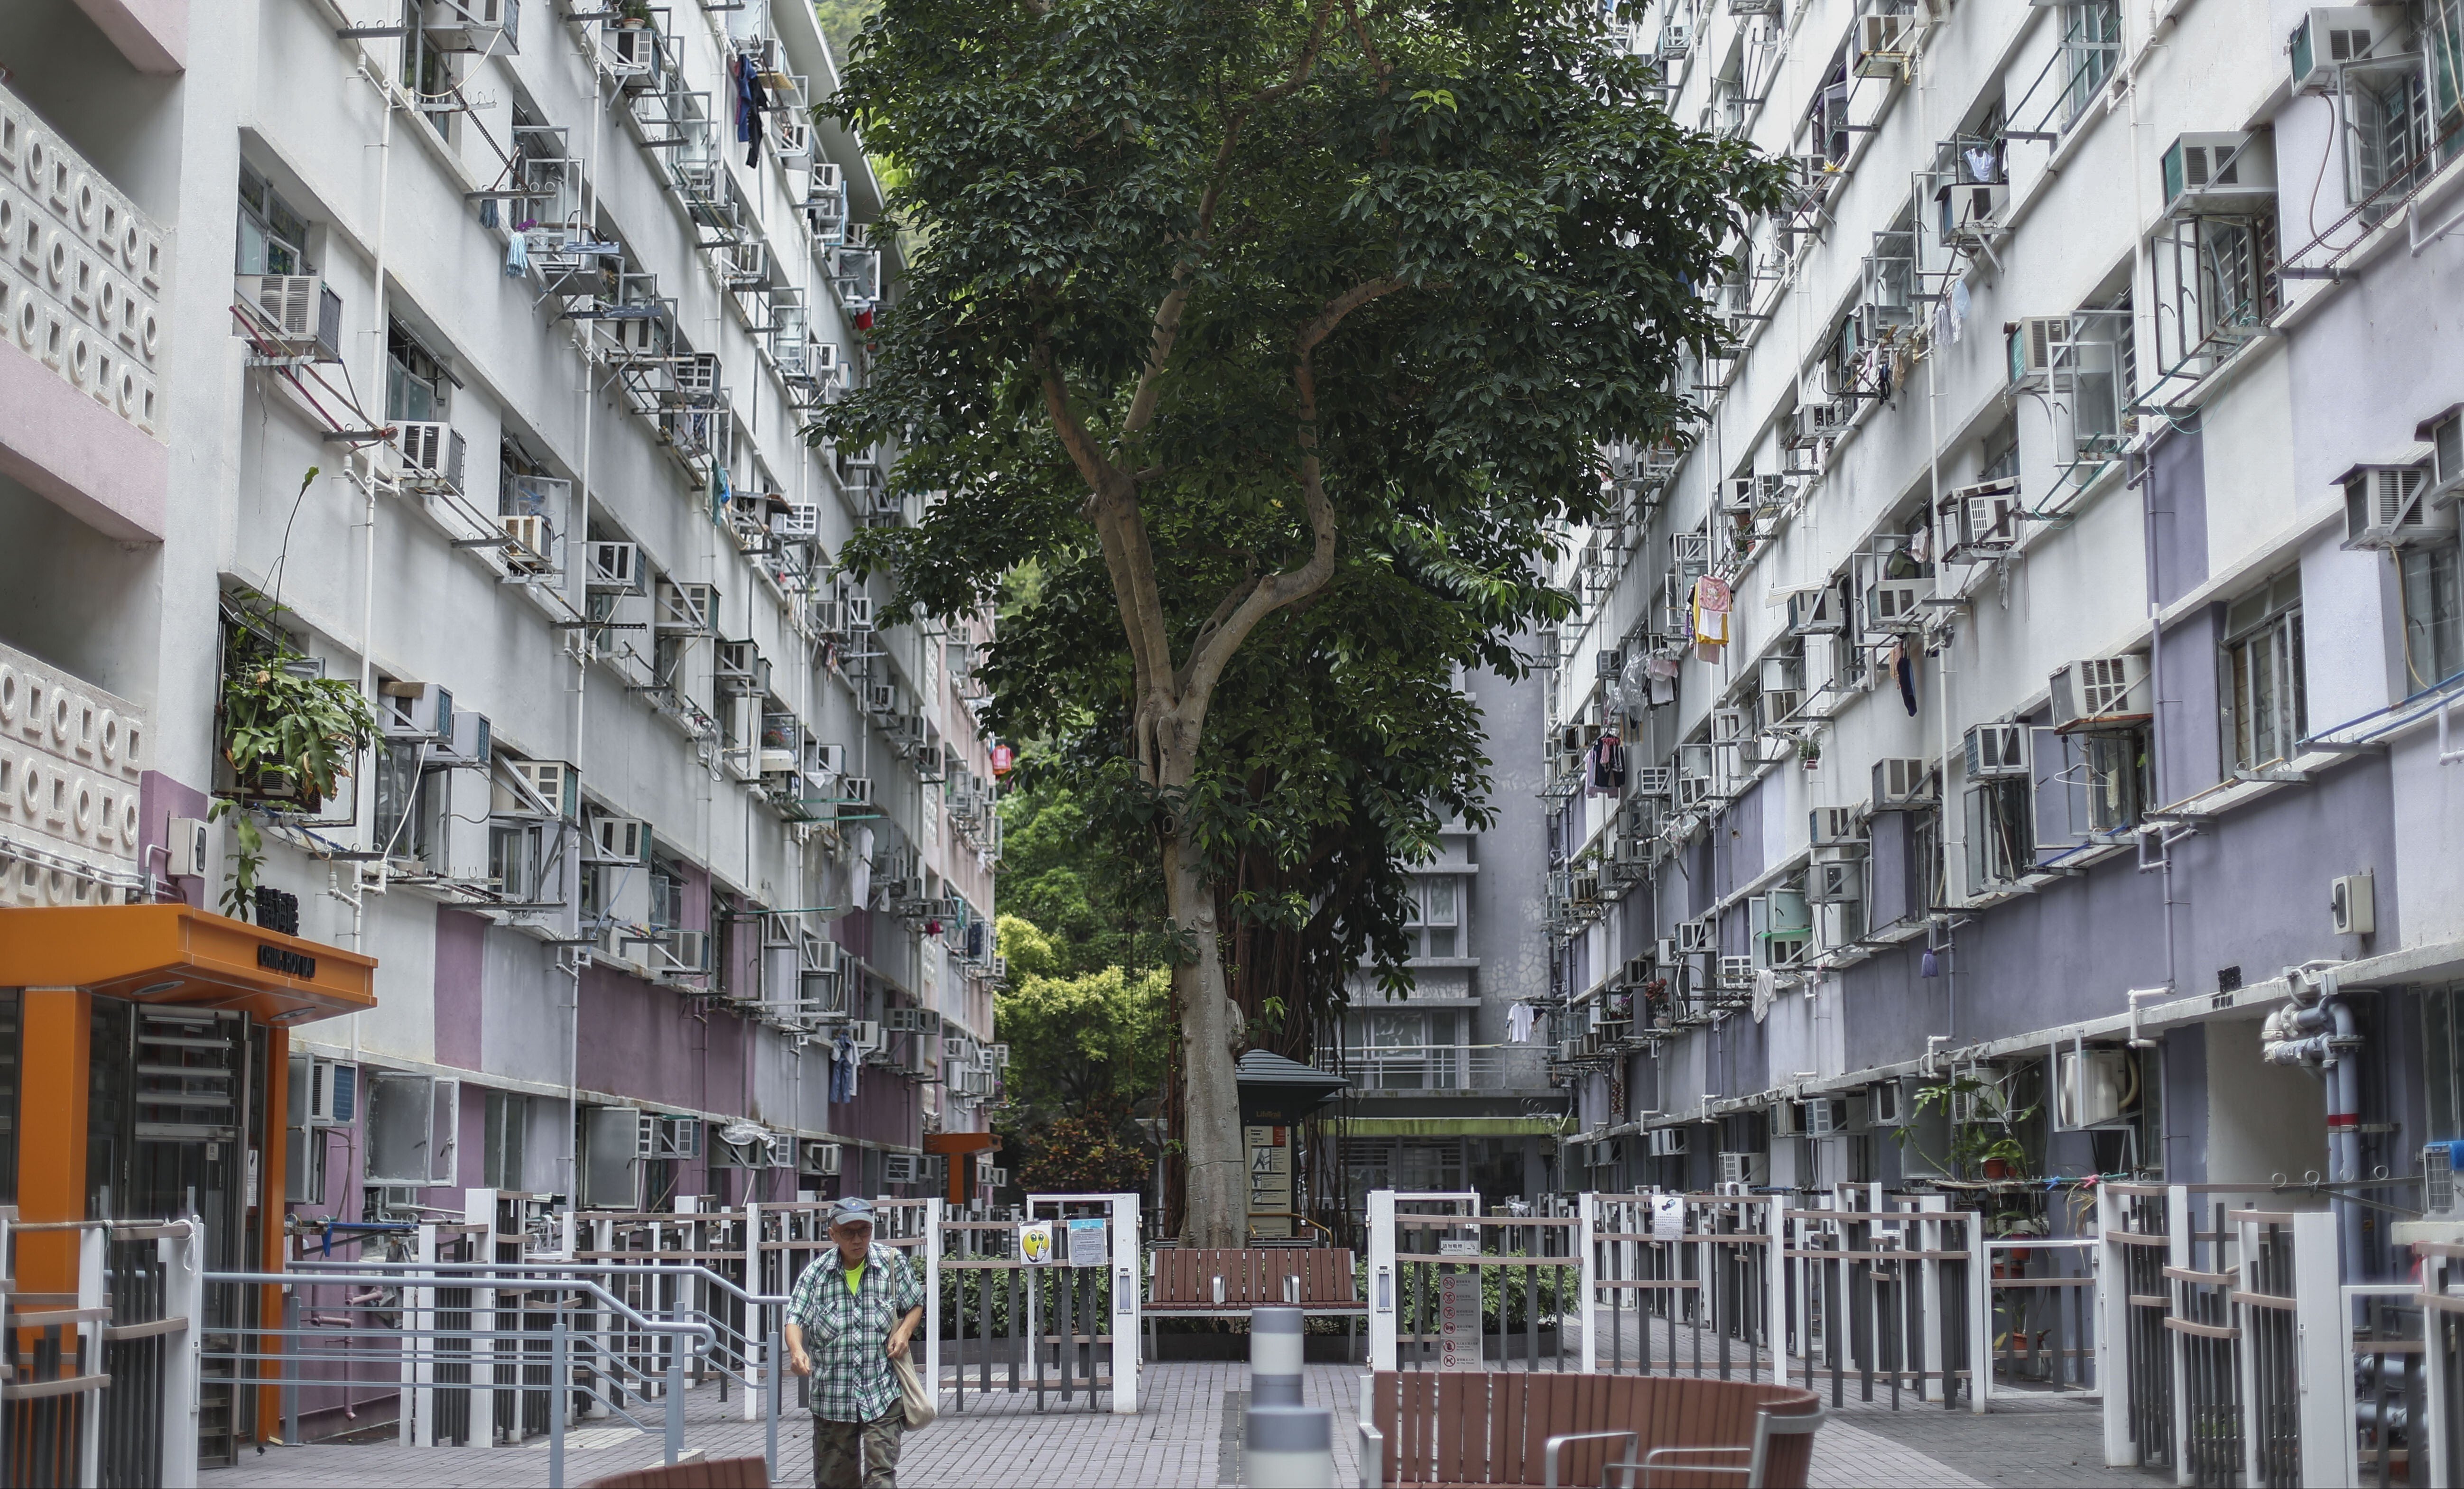 Yue Kwong Chuen in Aberdeen, one of the oldest public housing estates in the city, is about to be redeveloped. Photo: Nora Tam